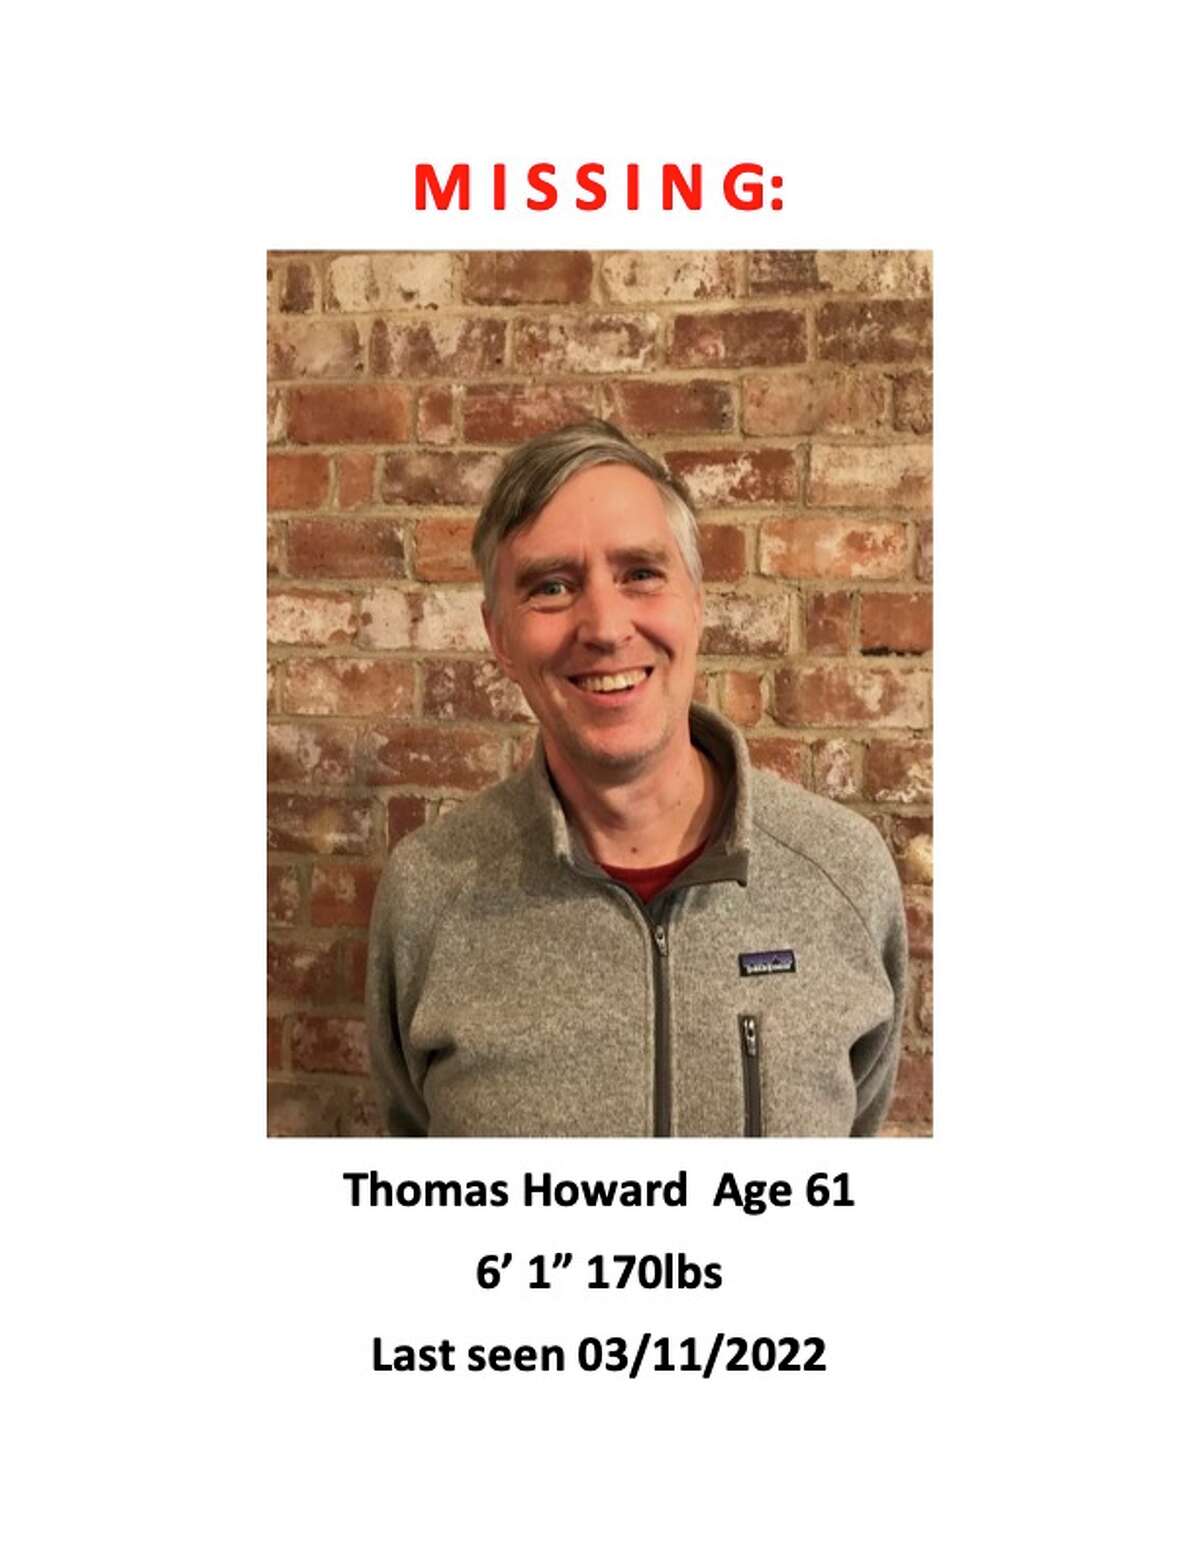 Thomas Howard was last seen March 11 and reported missing March 16.